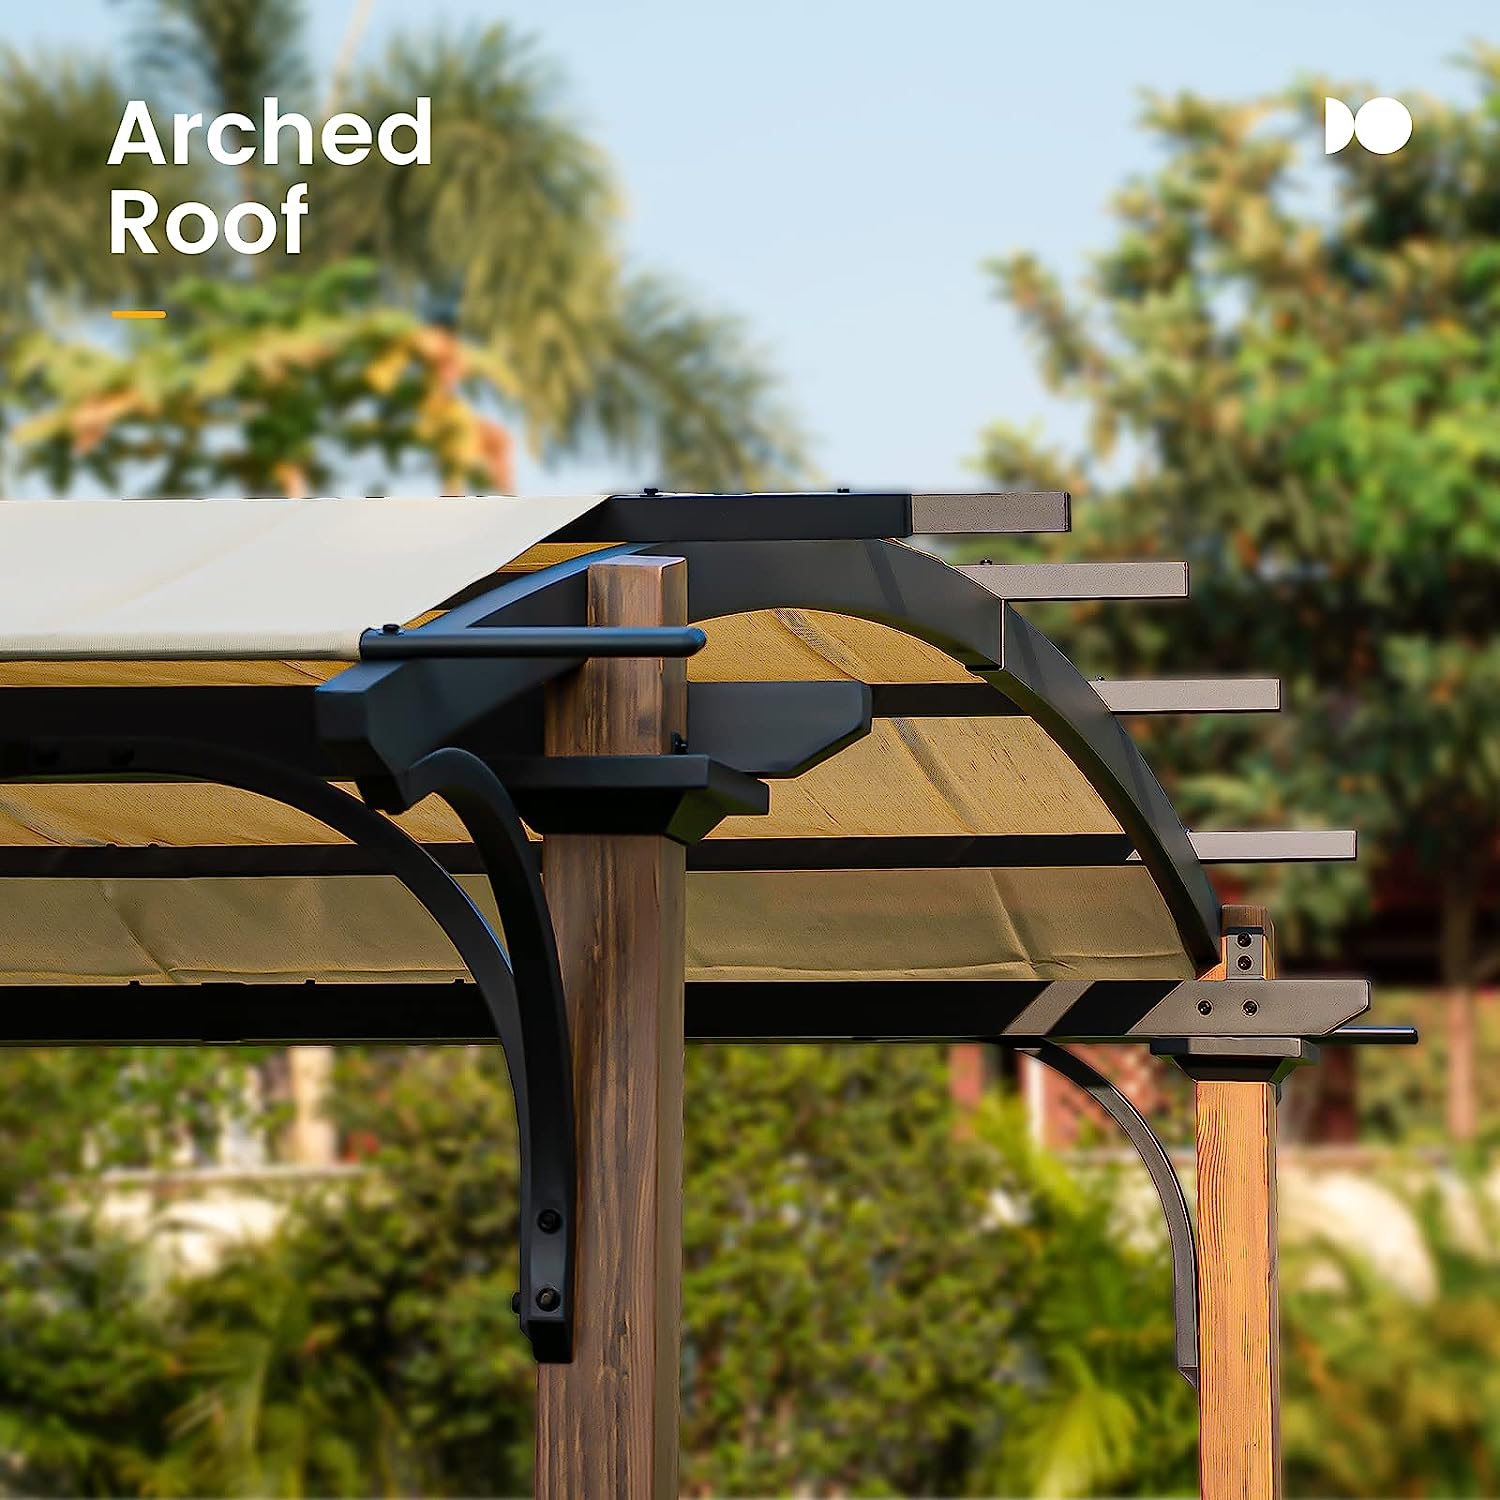 OLILAWN Pergola 8.5' X 13', Steel Arched Pergola with Sturdy Rust-Resistant Powder-Coated Steel Frame